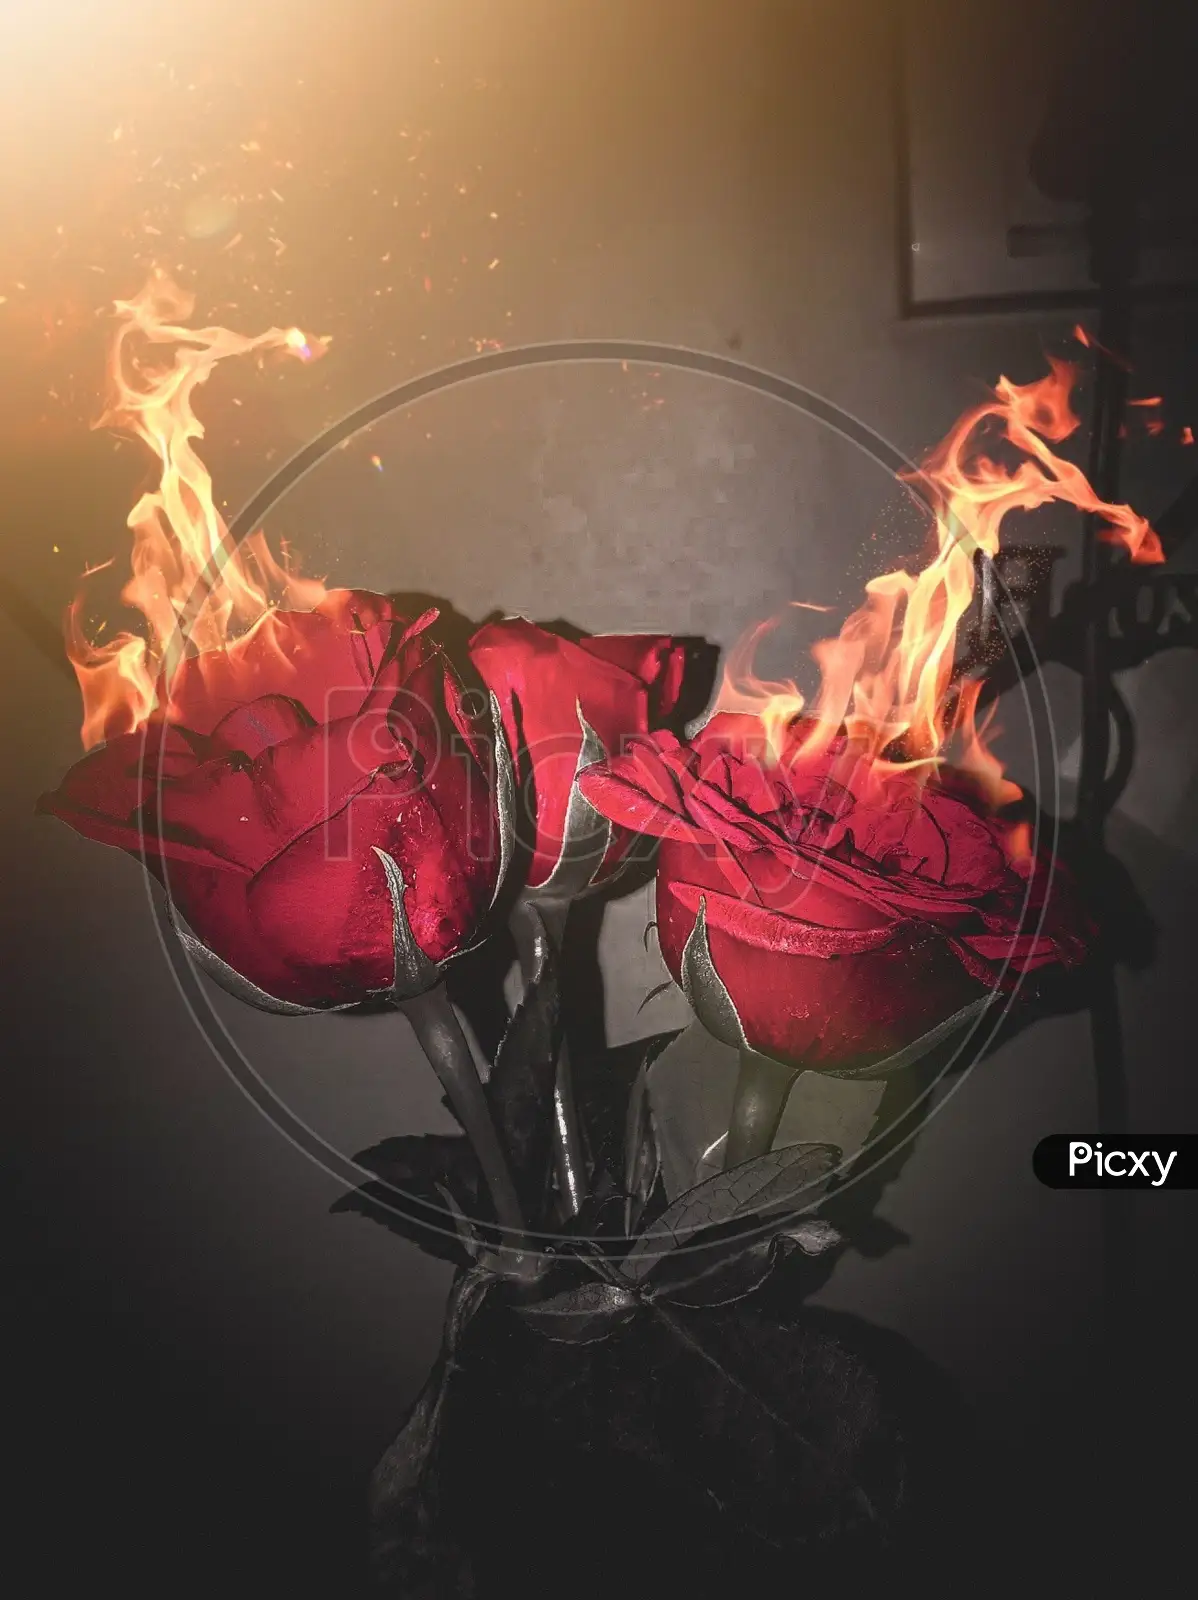 Rose fire Stock Photos, Royalty Free Rose fire Images | Depositphotos